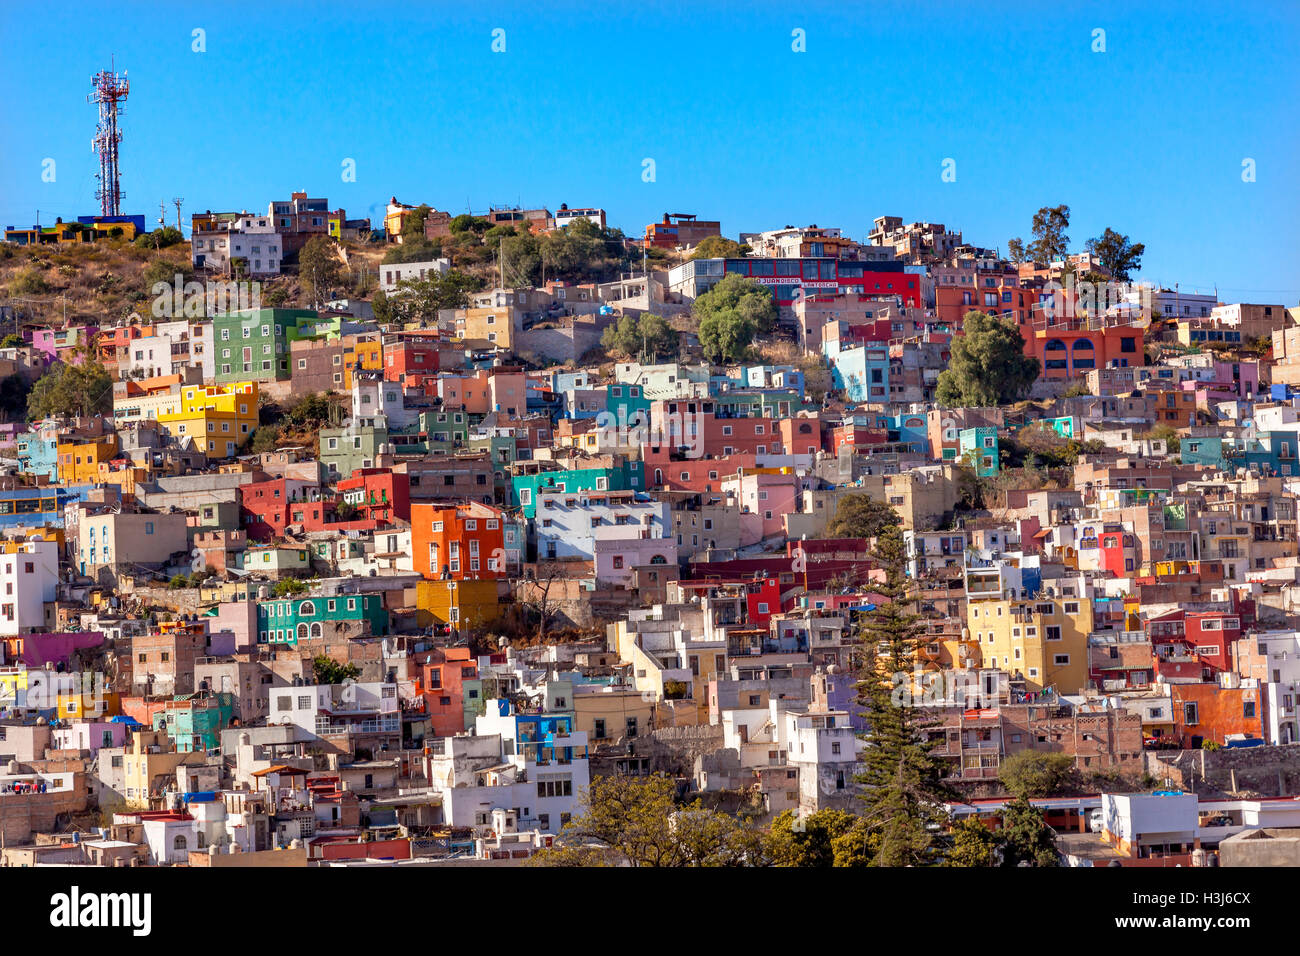 Many Colored Orange Blue Red Houses of Guanajuato Mexico Stock Photo